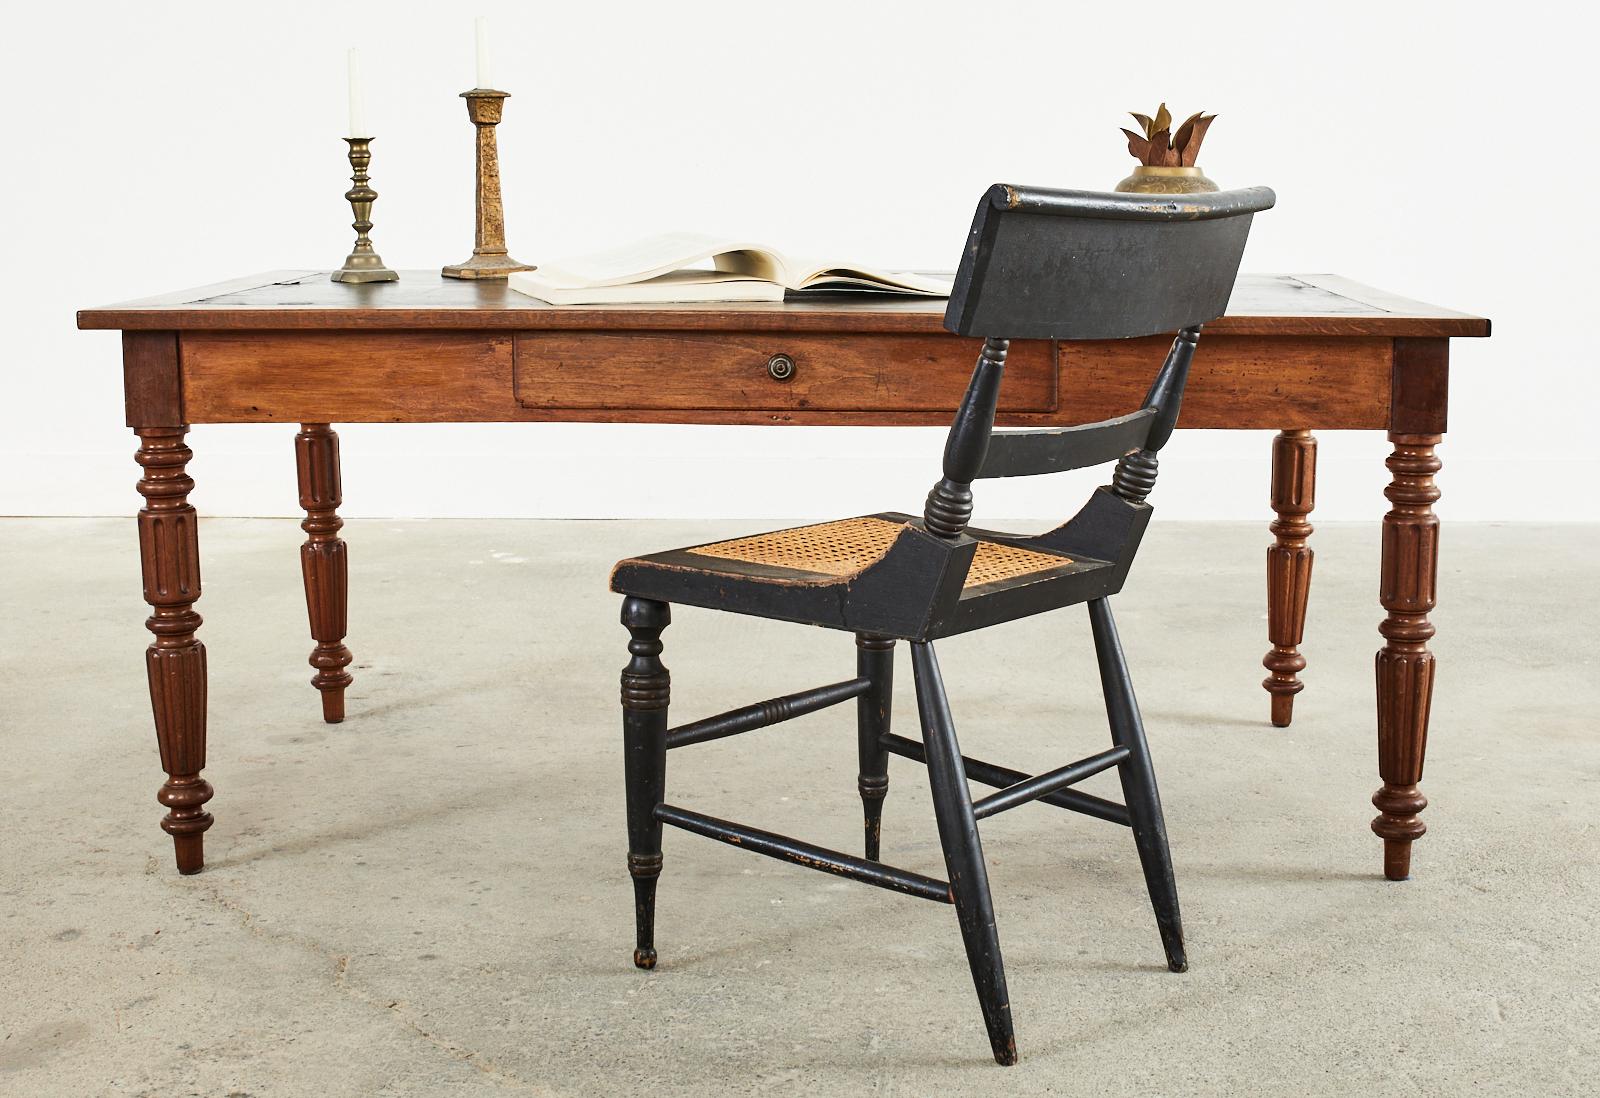 Rustic 19th century French Louis Philippe writing table or desk featuring a painted or waxed canvas writing surface. The table is crafted from an oak top inset with a unique black painted canvas writing surface and supported by a fruitwood case